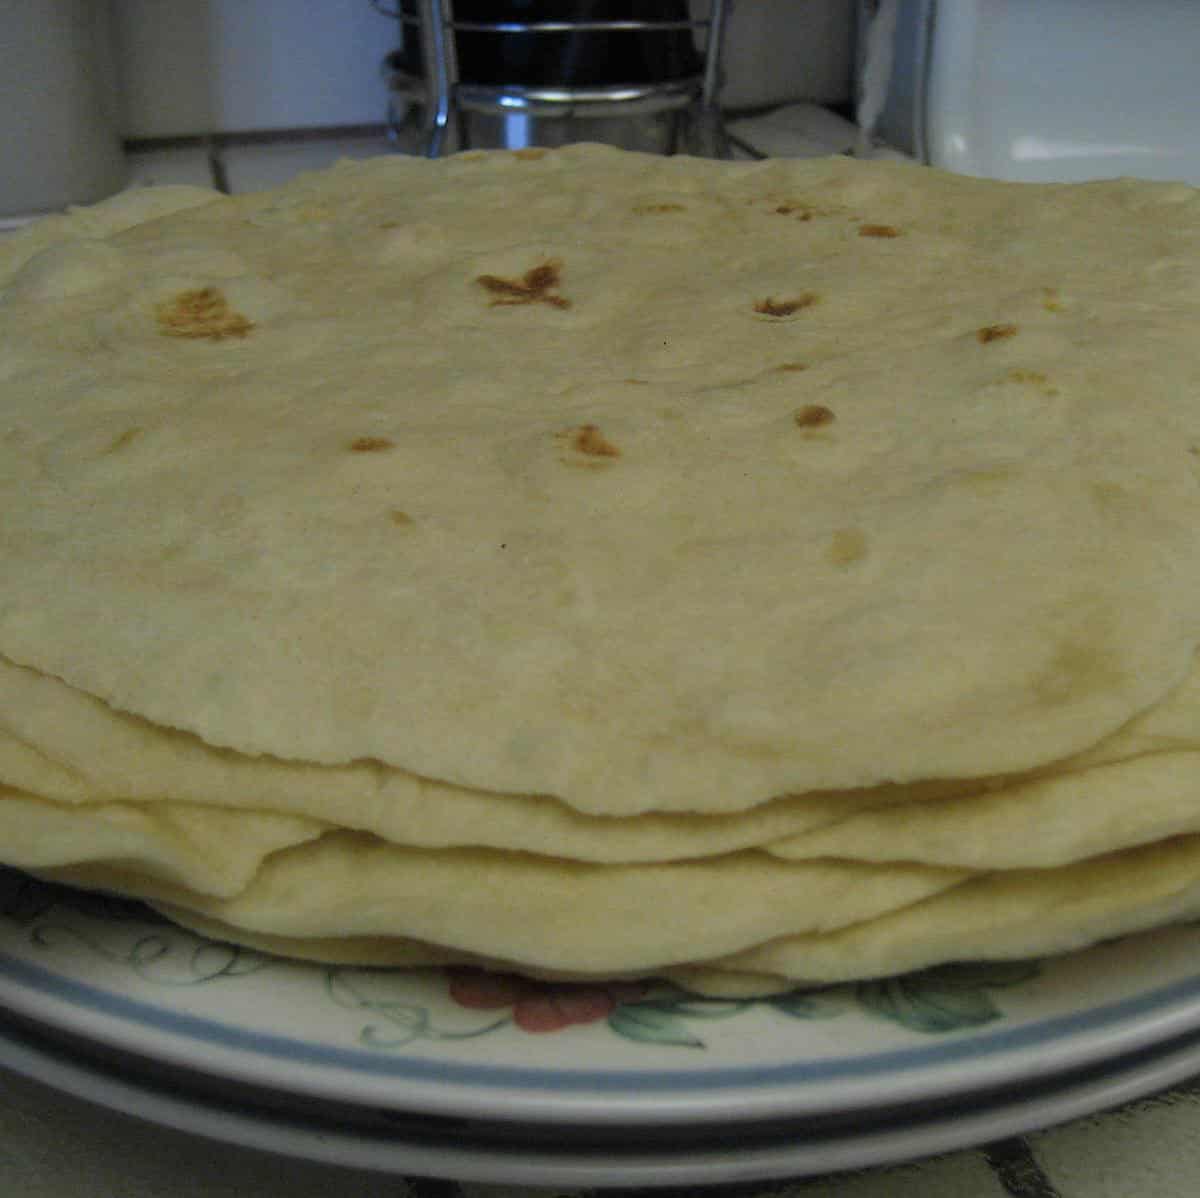  Bring a taste of Mexico straight to your kitchen with Aunt Sharleen's flour tortilla recipe.